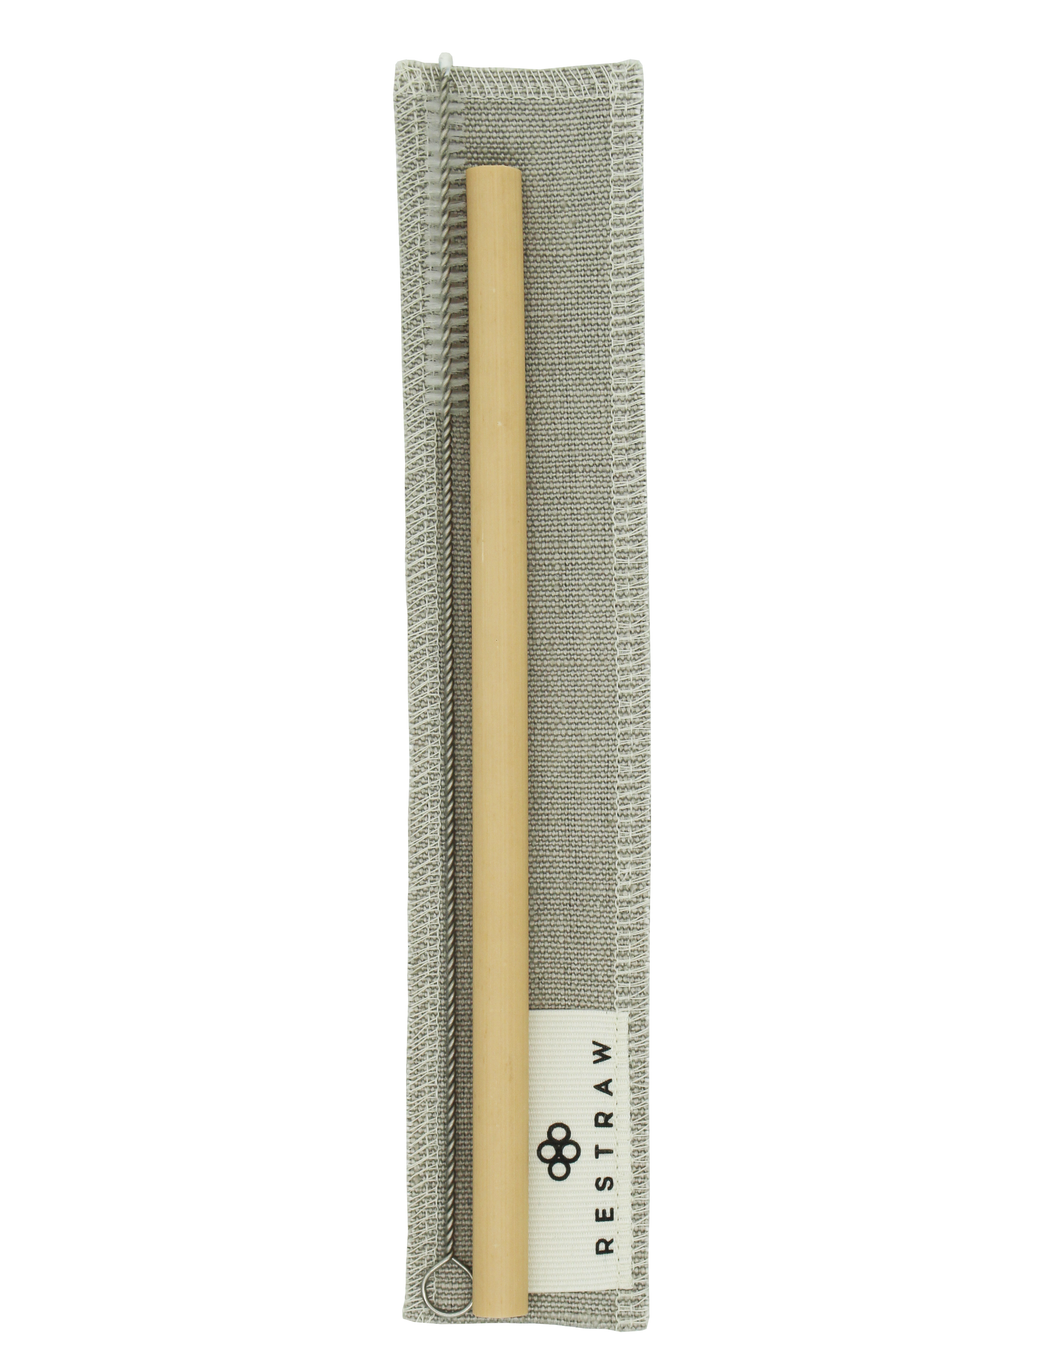 The Bamboo RESTRAW Set - 1 Pack (200mm)